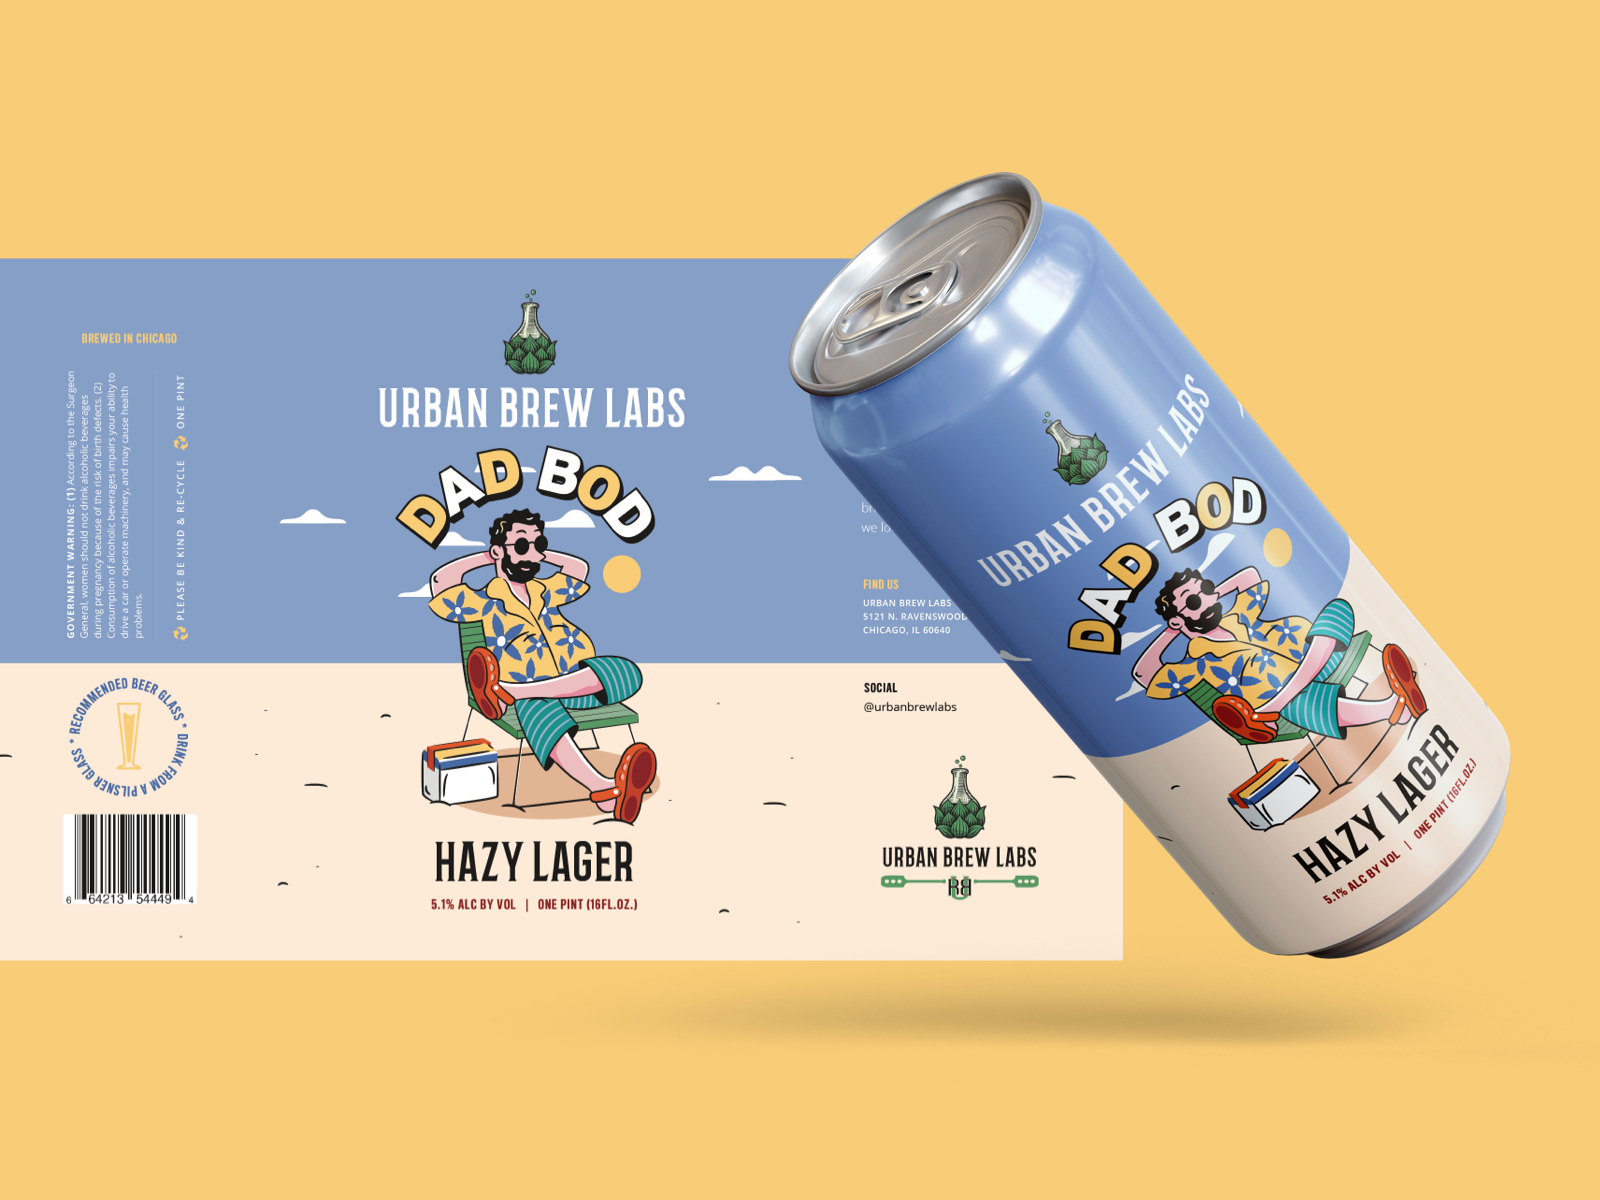 Chef & The Farmer Beer Can Drinking Glass —